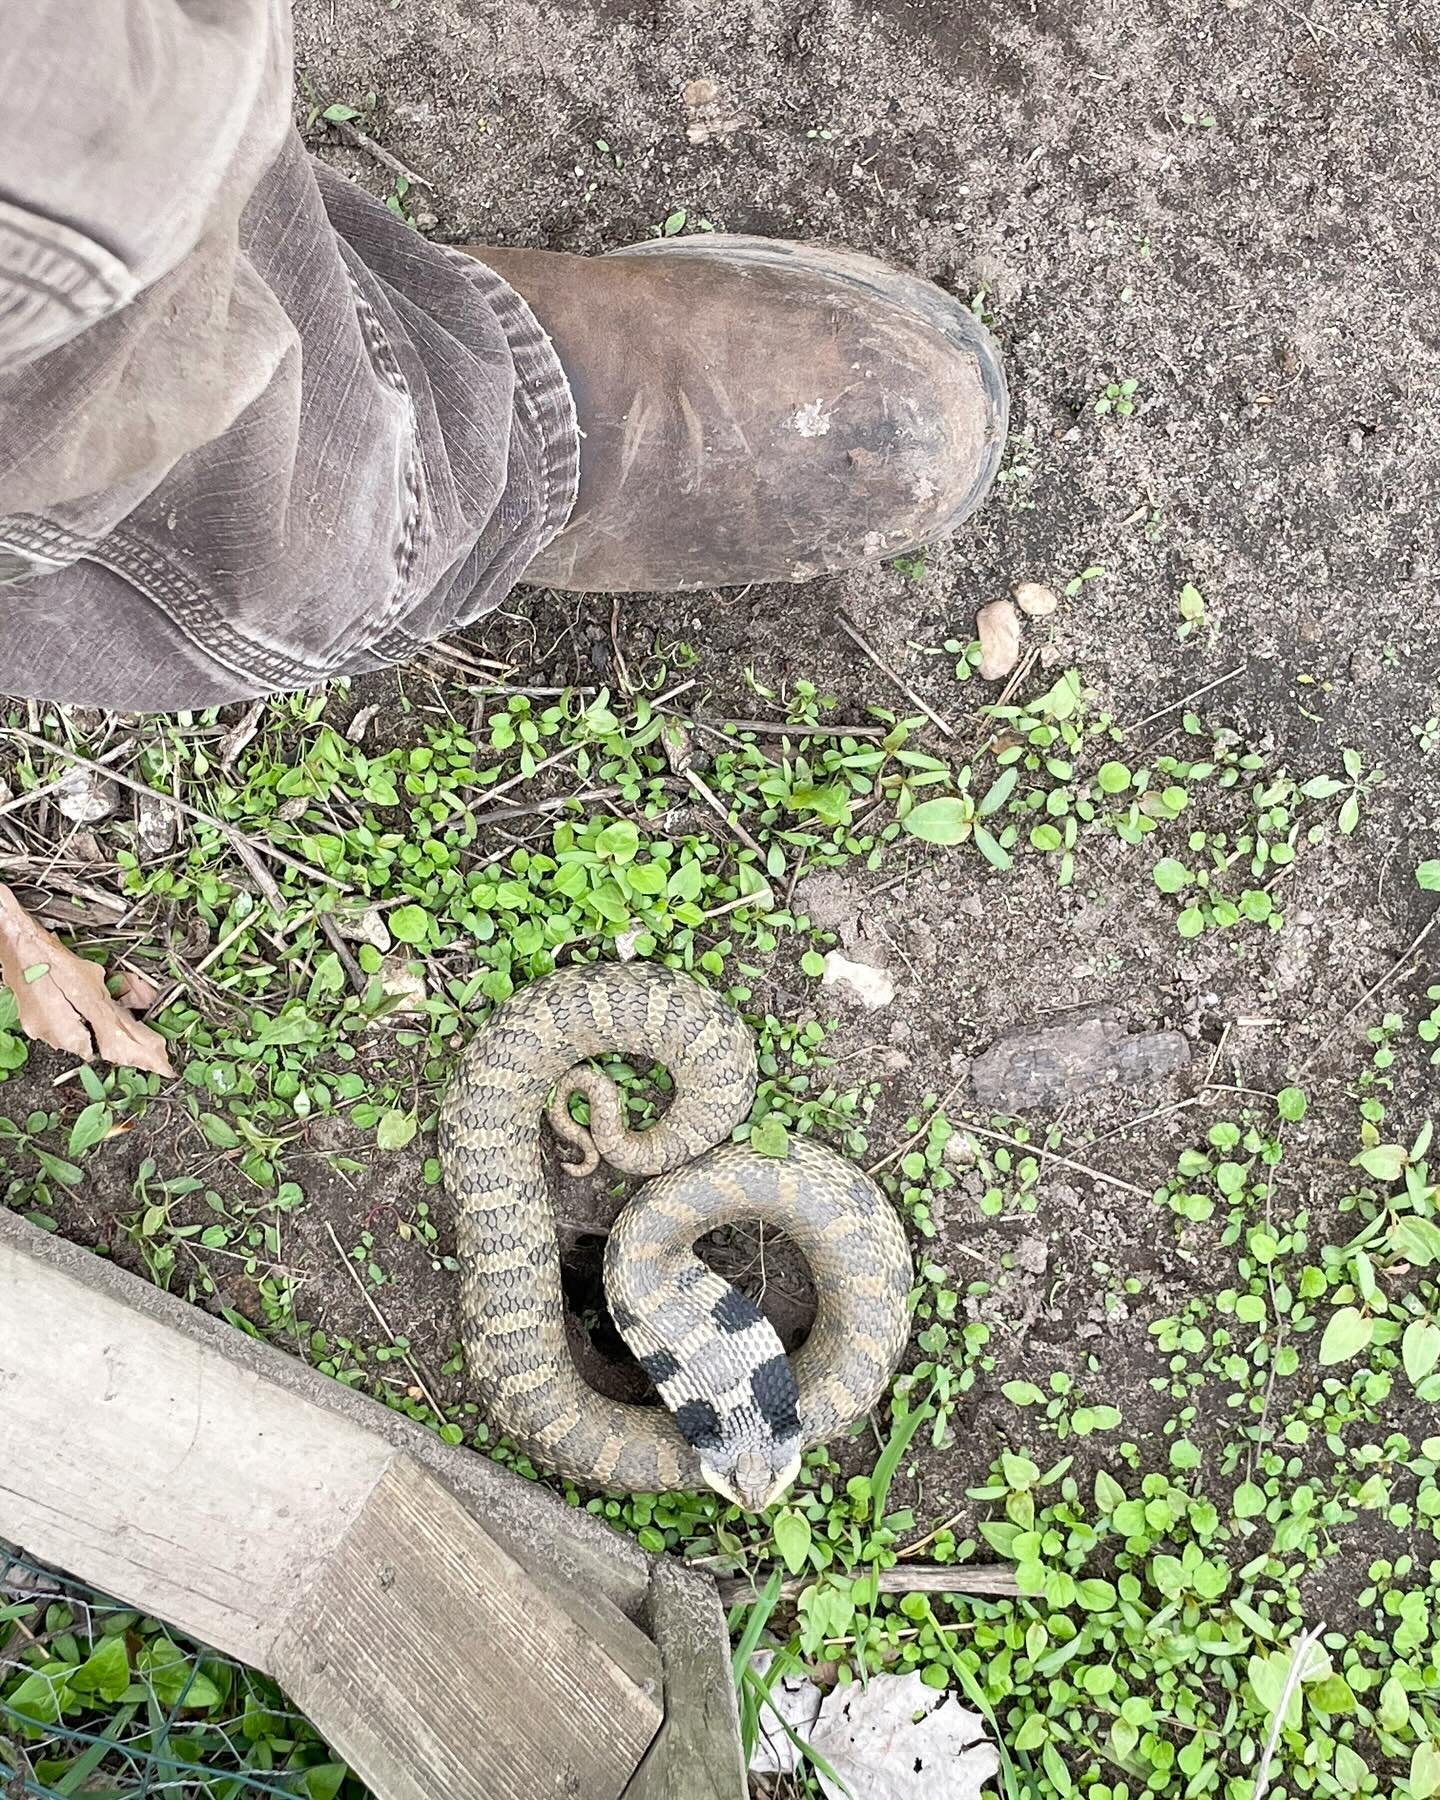 Farmer James made a friend while mending the chicken coop! 🫣 He almost stepped on the little guy.

#snake #hognose #farm #chickens #upnorth #michigan #traversecity #leelanau #cedar #cedarnorthtc